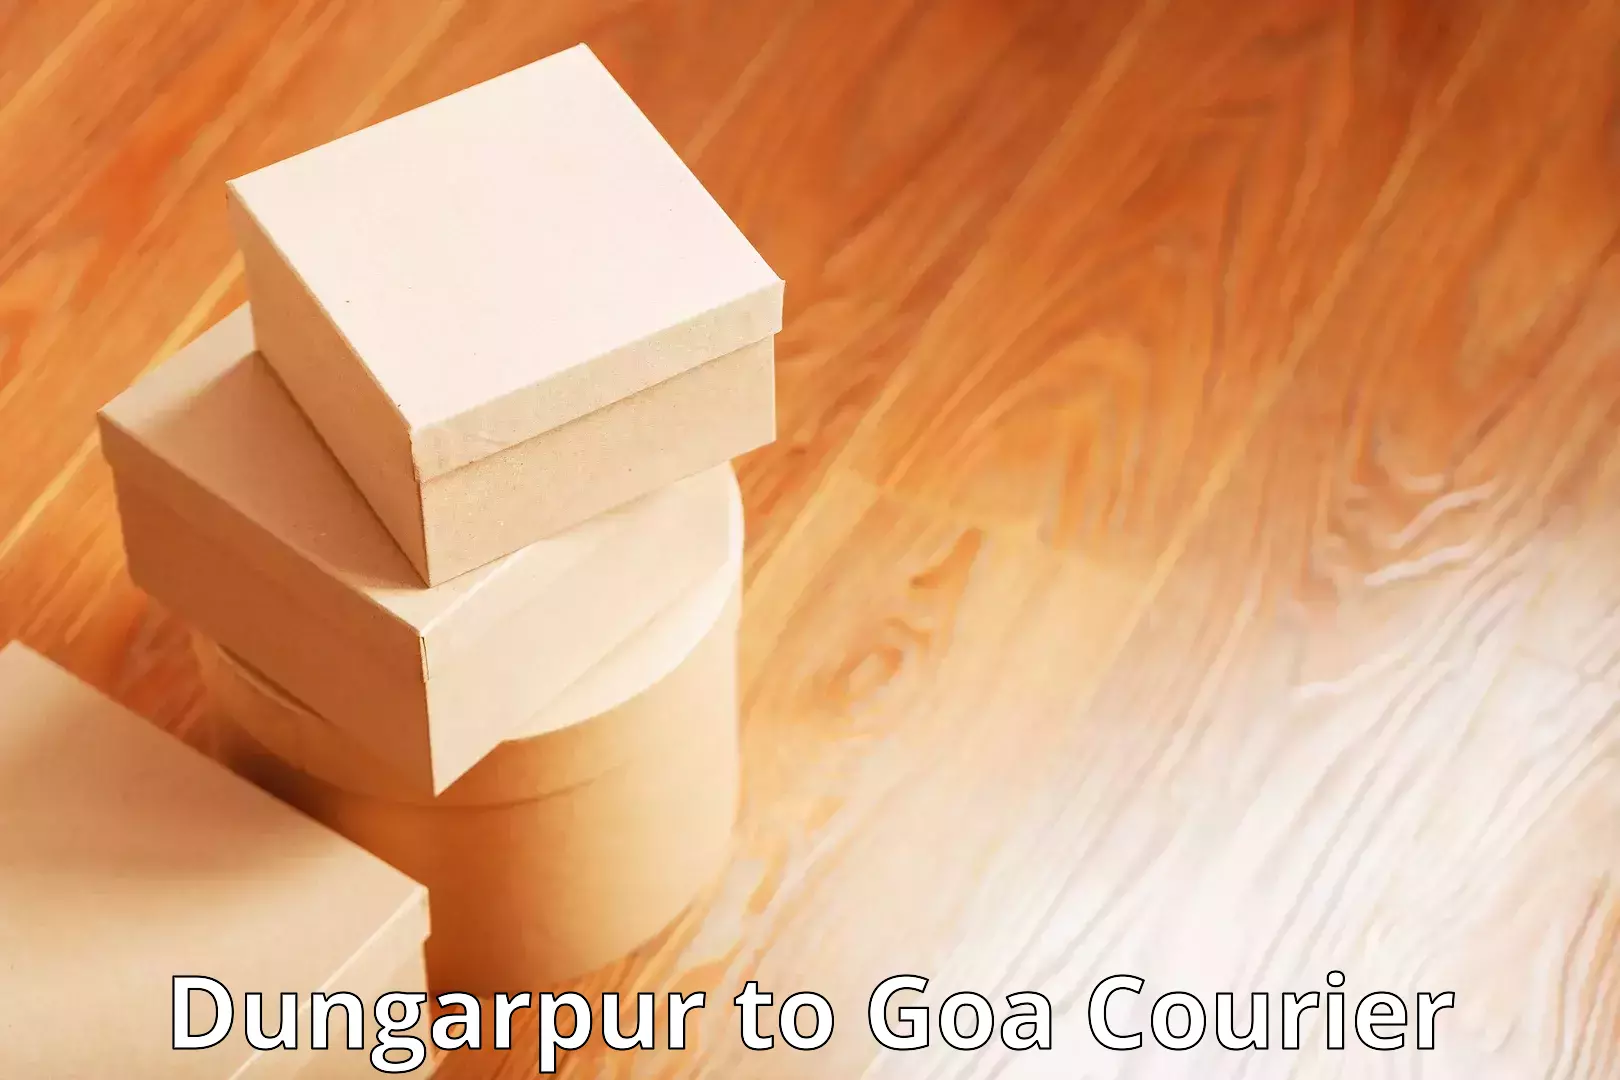 Courier service partnerships Dungarpur to South Goa